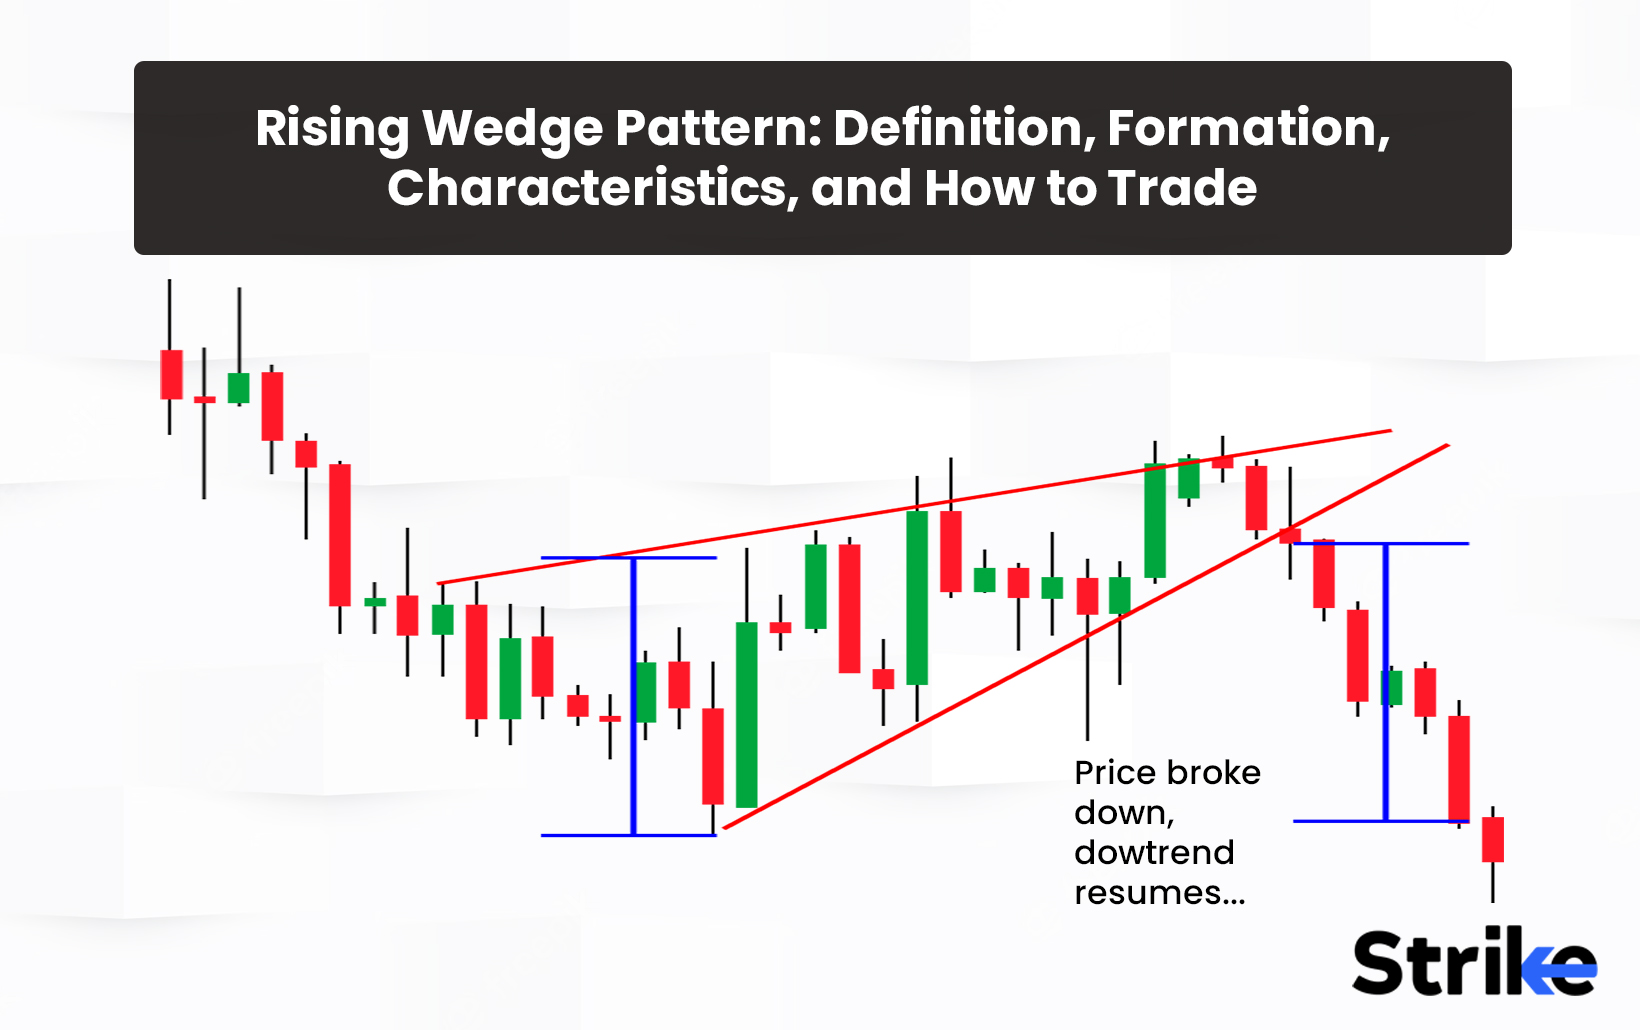 Rising Wedge Pattern: Definition, Formation, Characteristics, and How to Trade